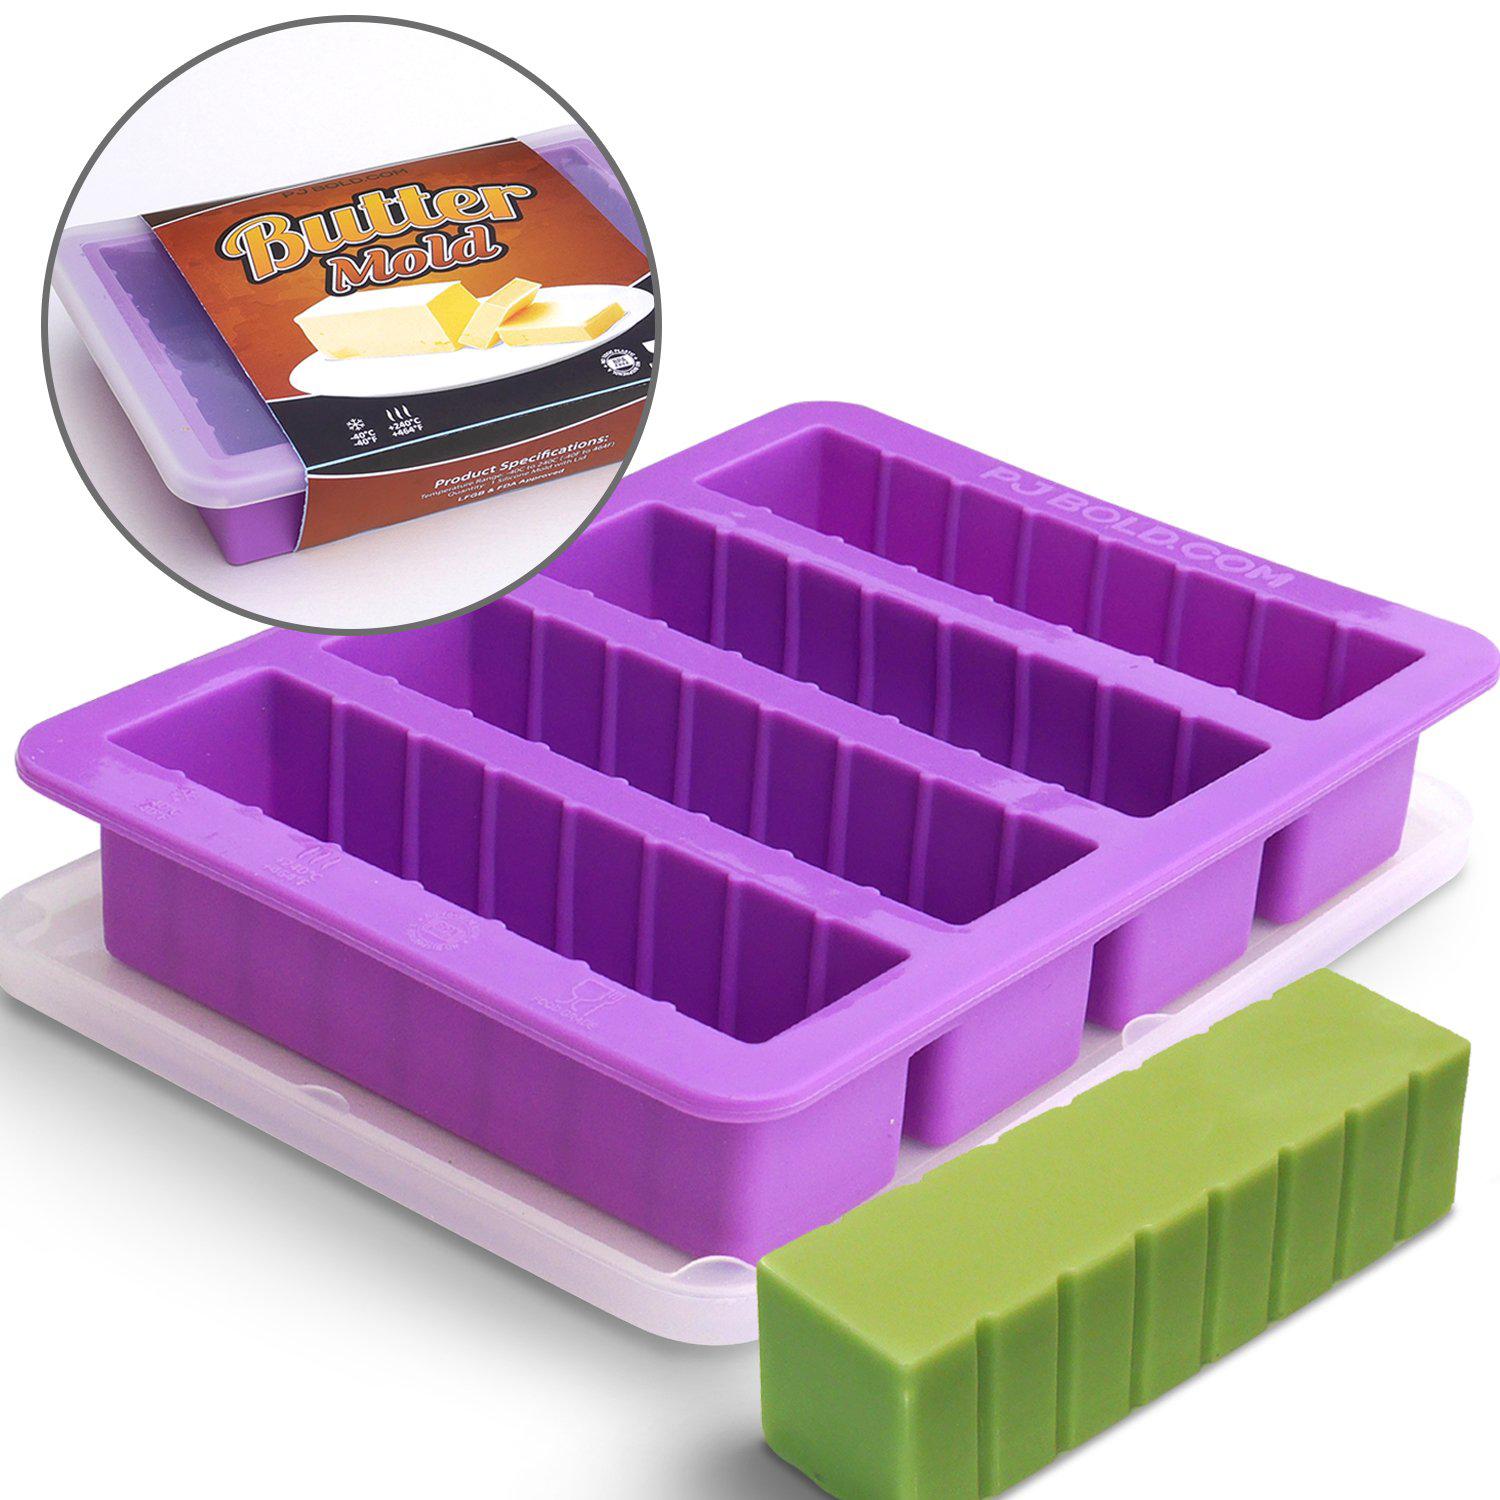 Pj Bold Silicone Butter Mold Tray with Lid, Purple